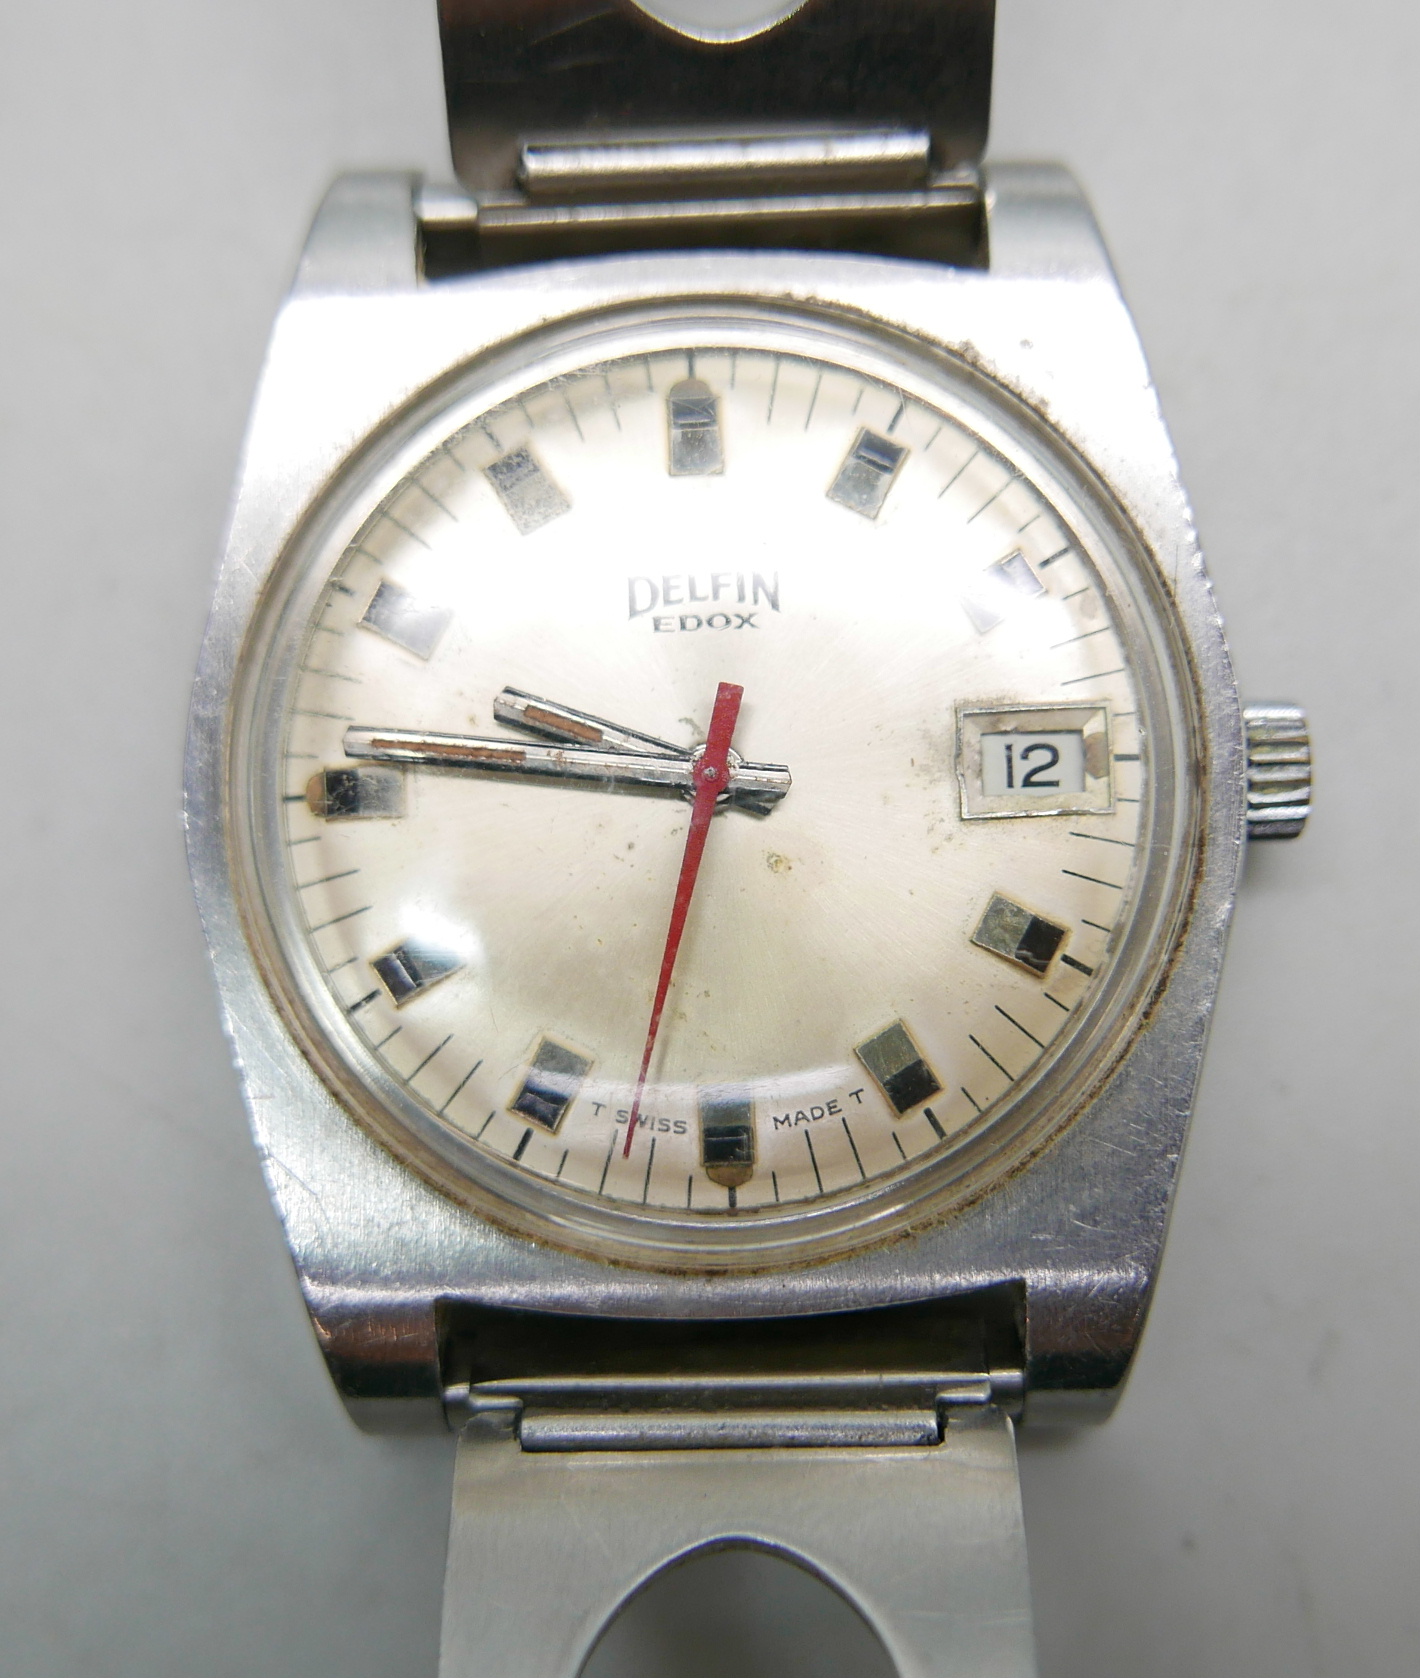 Two gentleman's wristwatches, Omega automatic date and Delfin Edox - Image 2 of 4